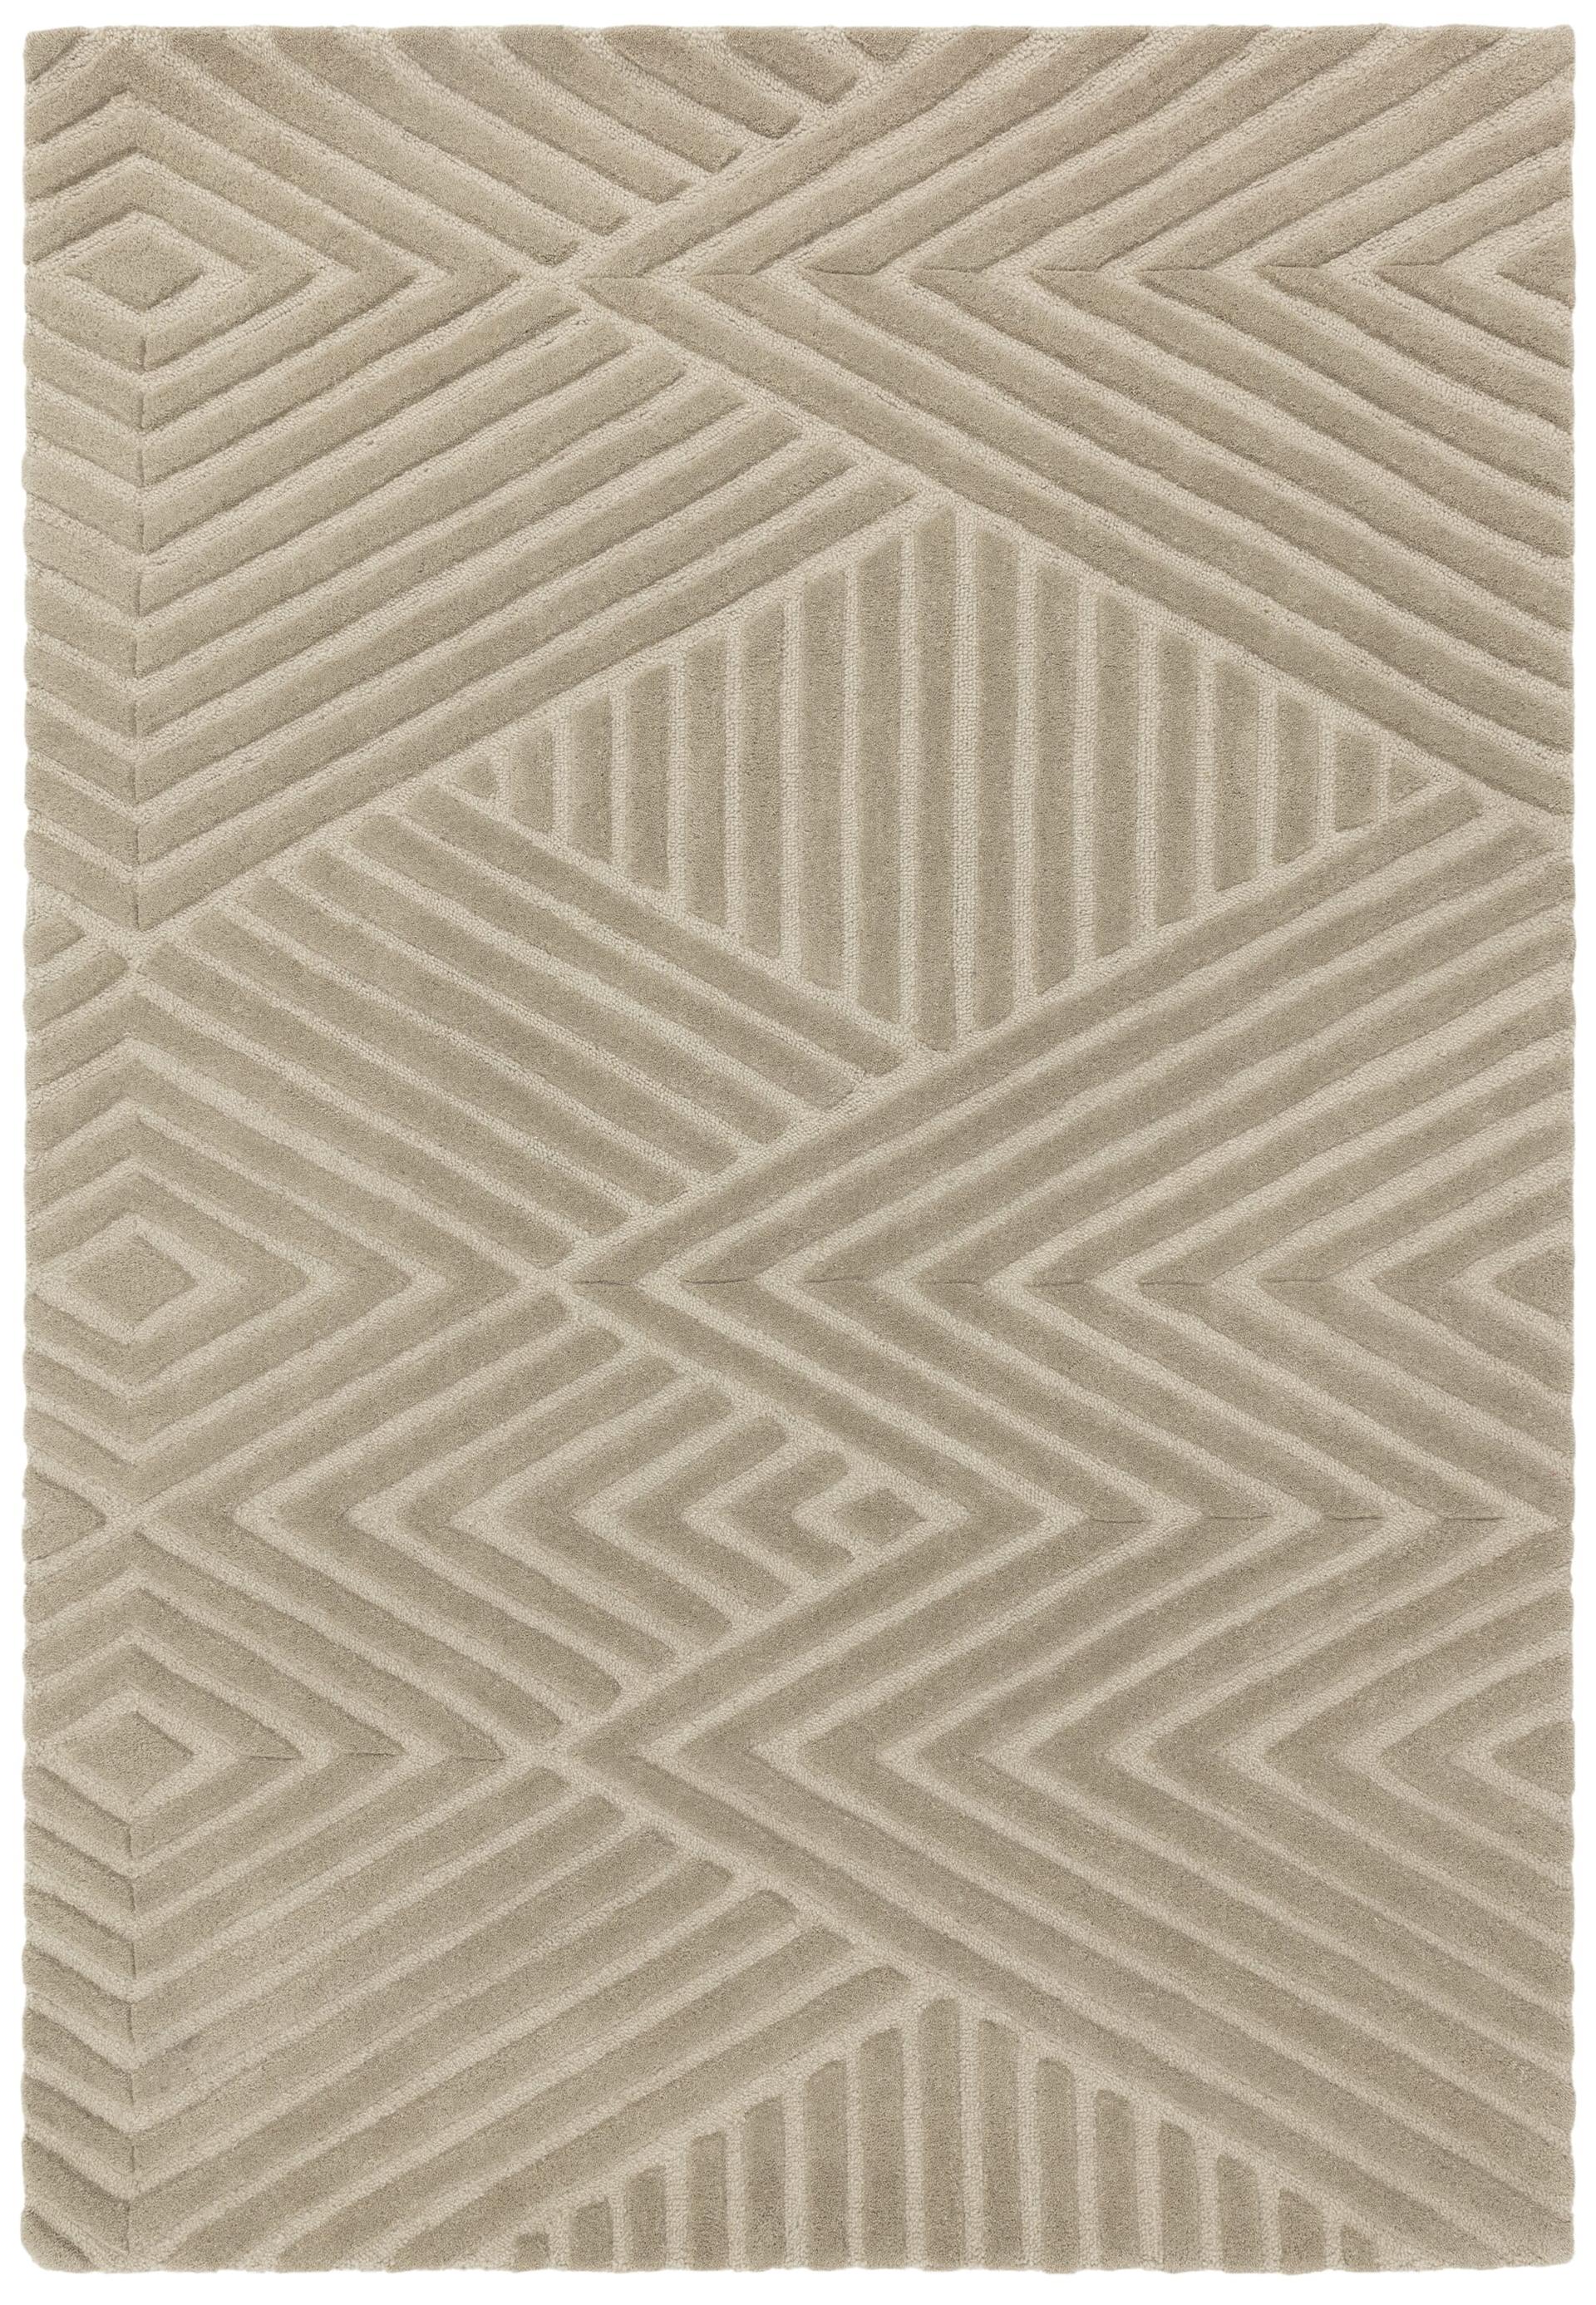 Hague Rug Taupe